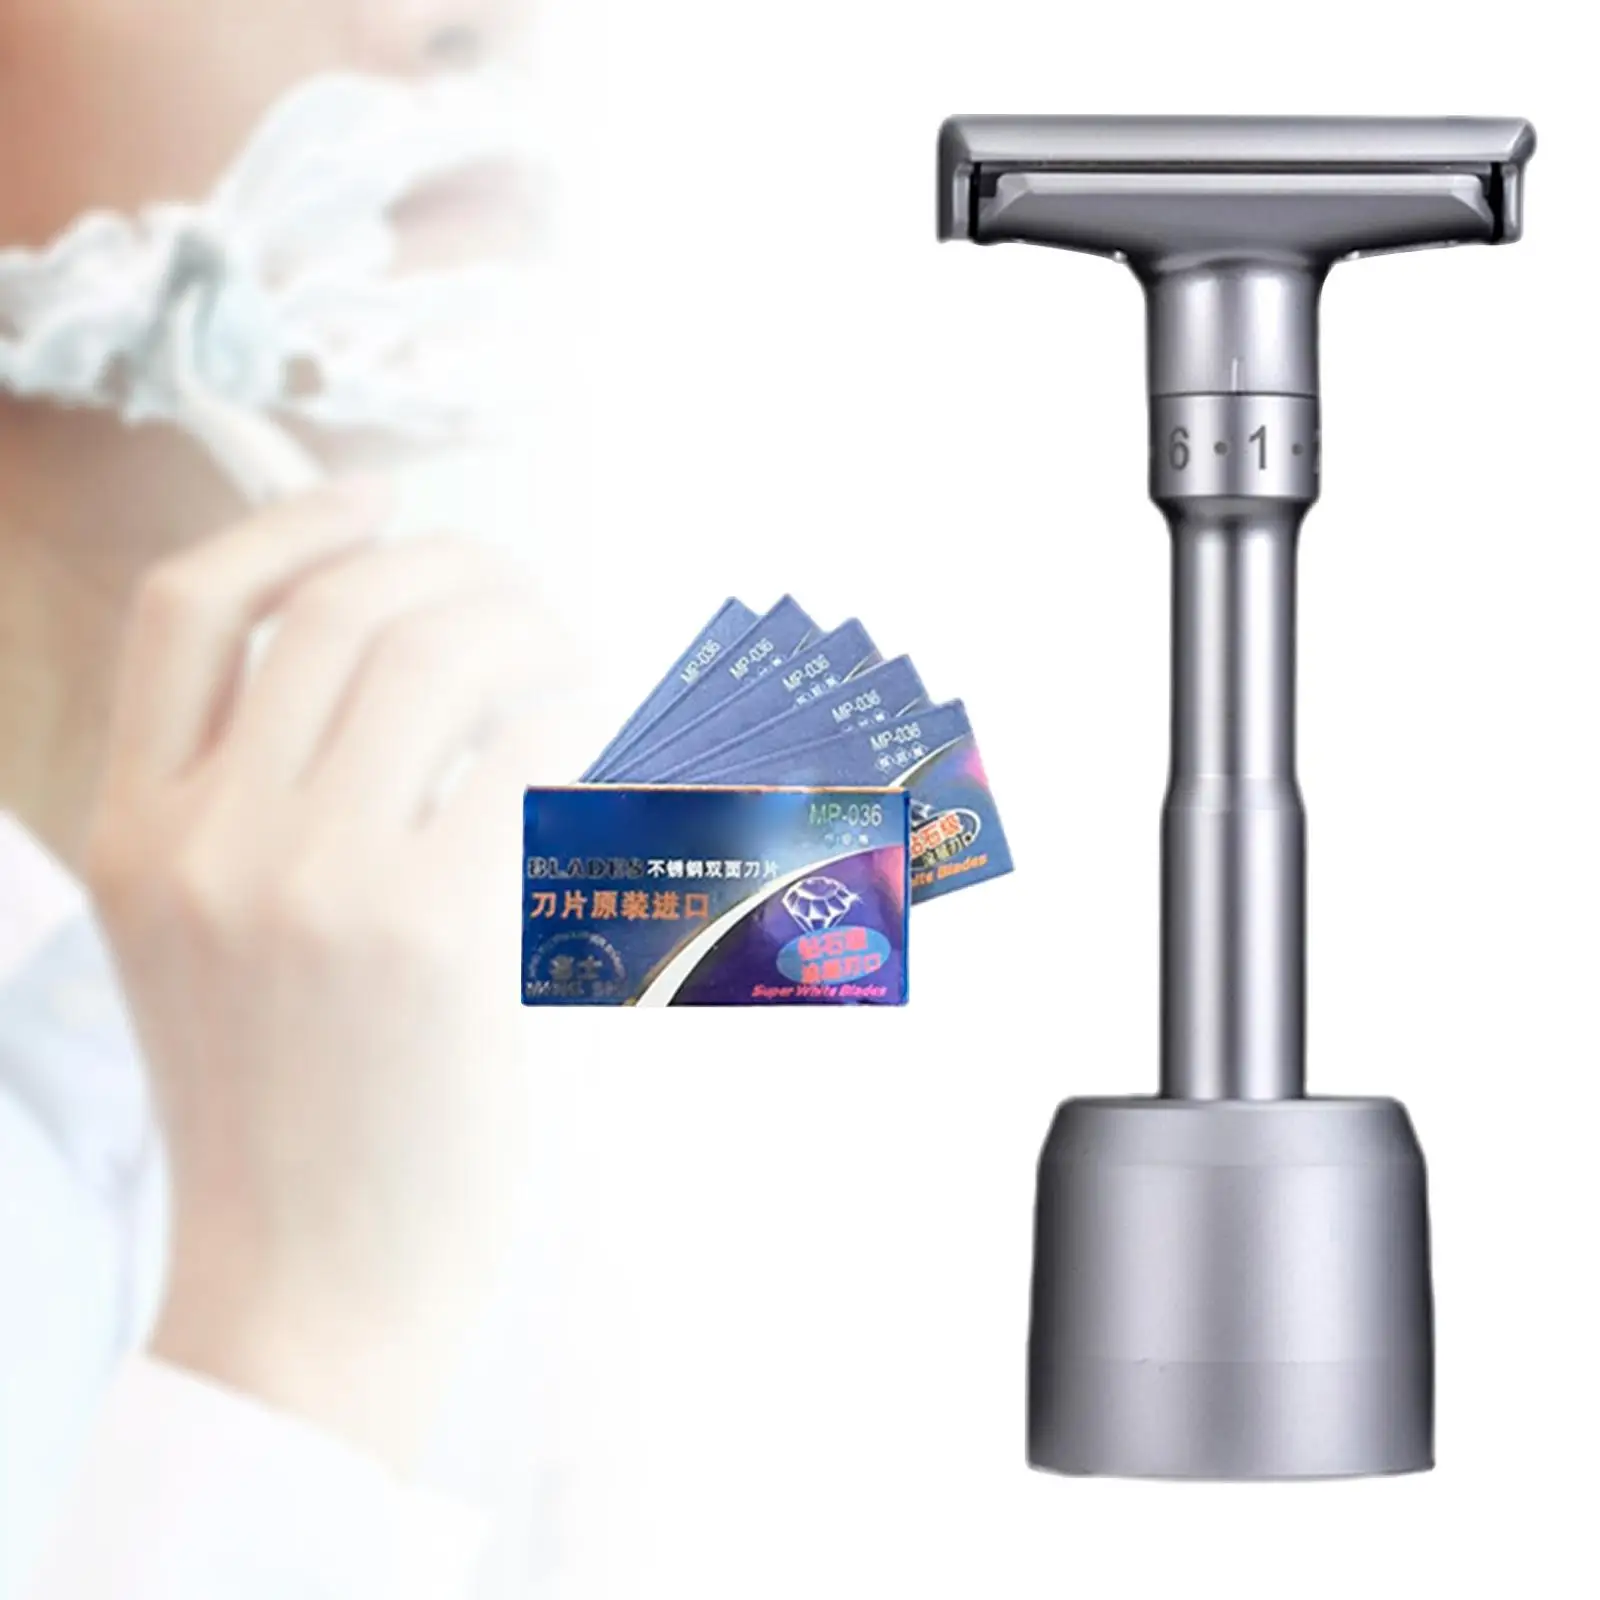 Adjustable Double Edge Safety Razor with Stand Base Portable for Barber Shop